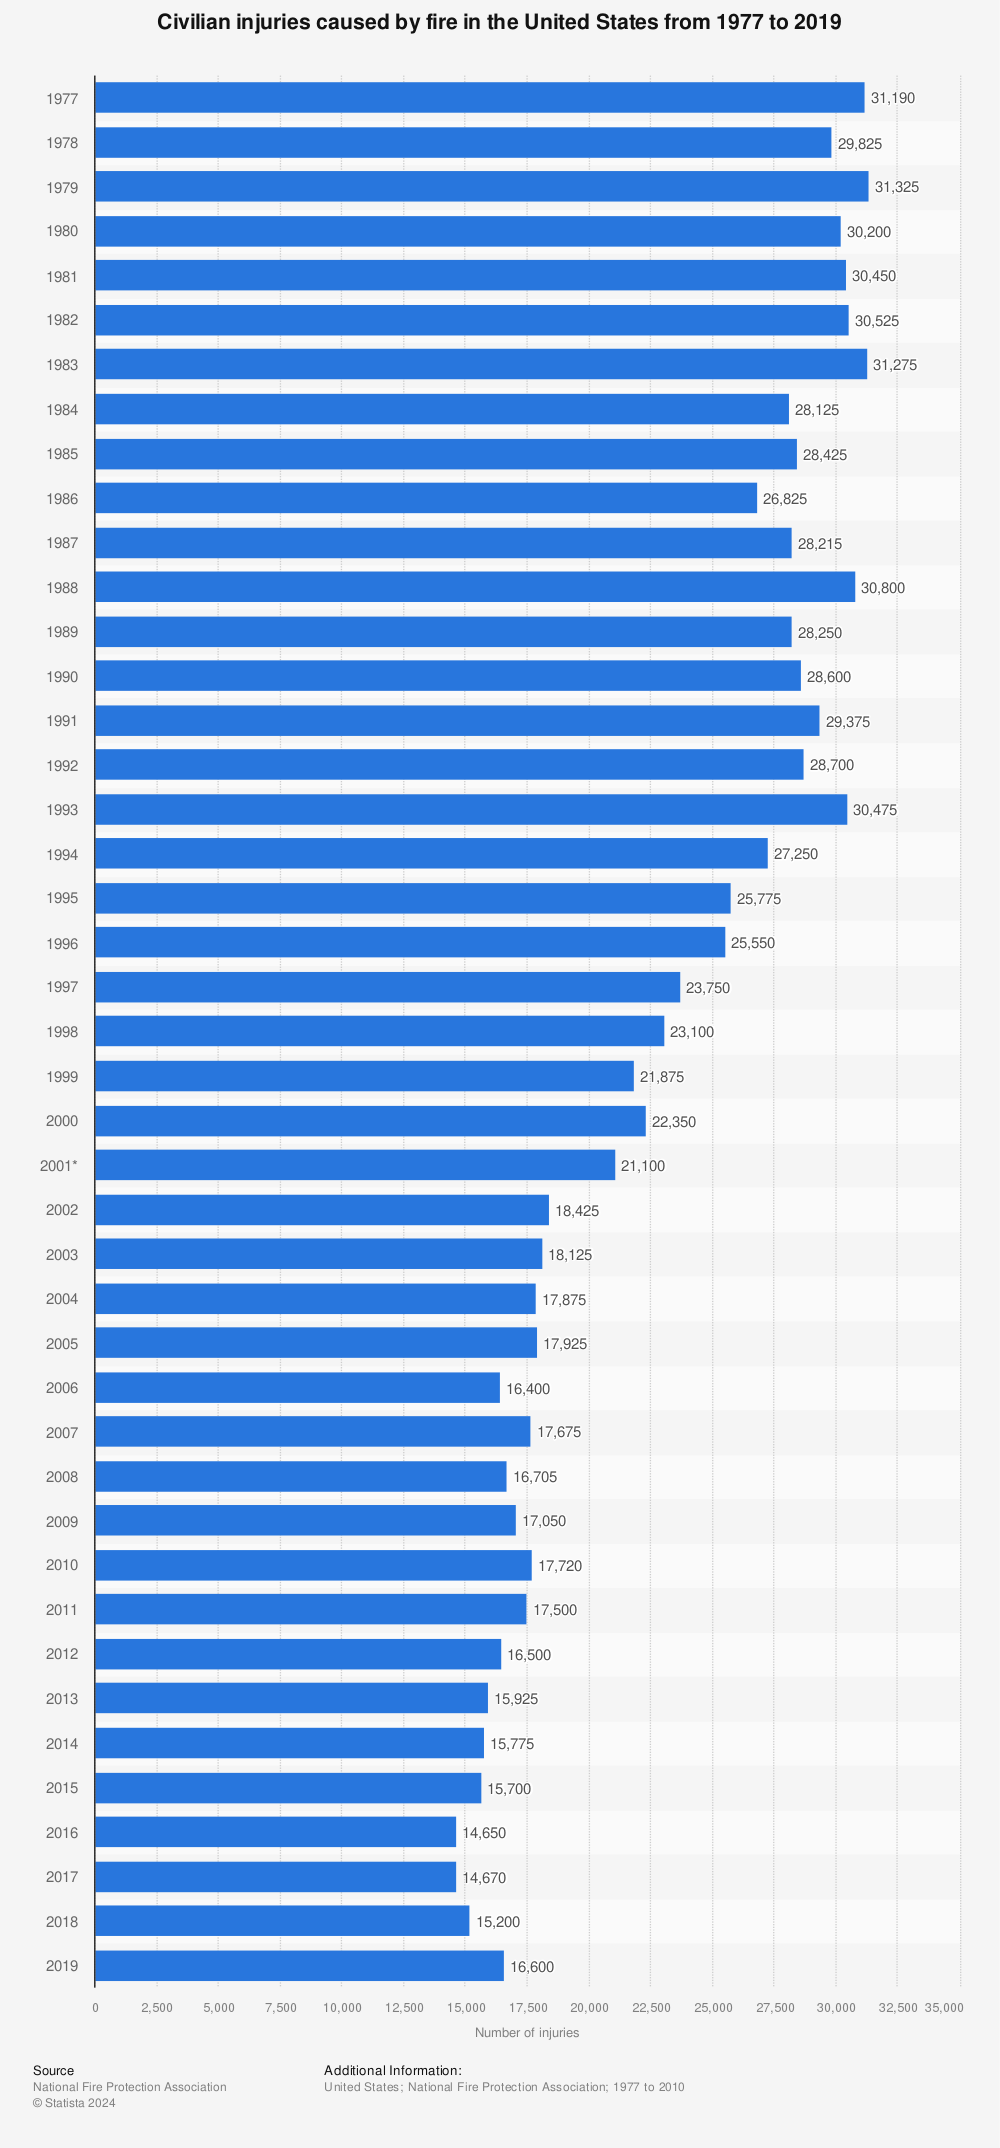 Statistic: Civilian injuries caused by fire in the United States from 1977 to 2019 | Statista